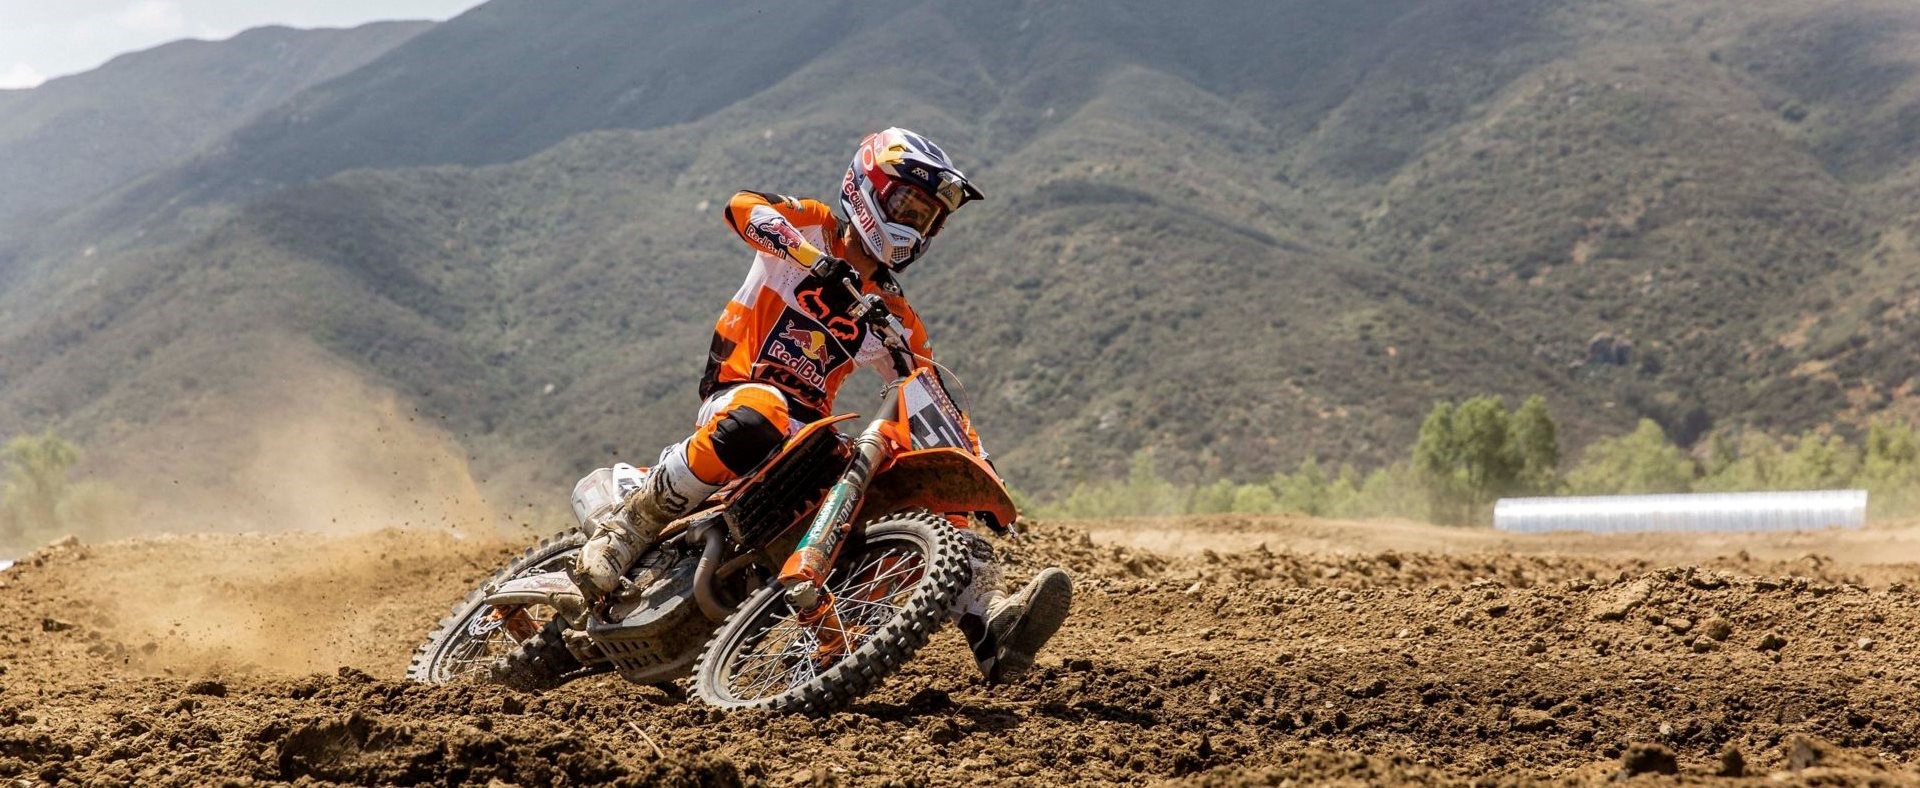 OPENING ROUNDS OF AMA PRO MOTOCROSS SERIES